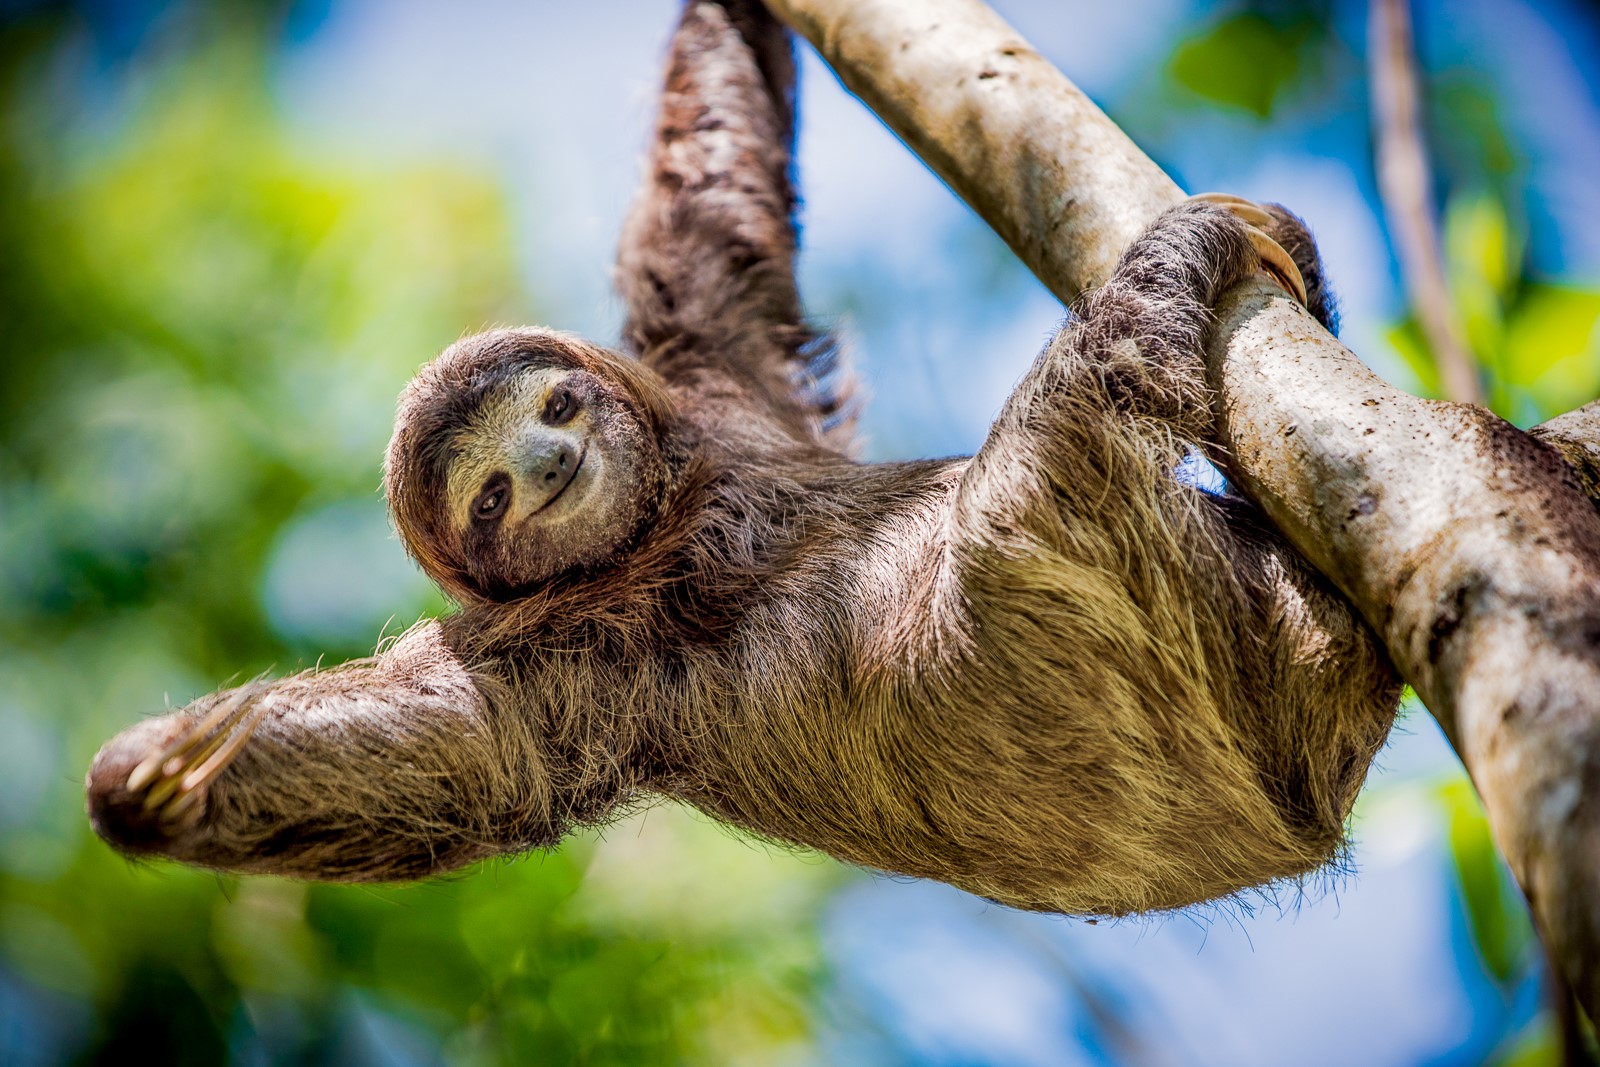 A sloth in a tree in Costa Rica